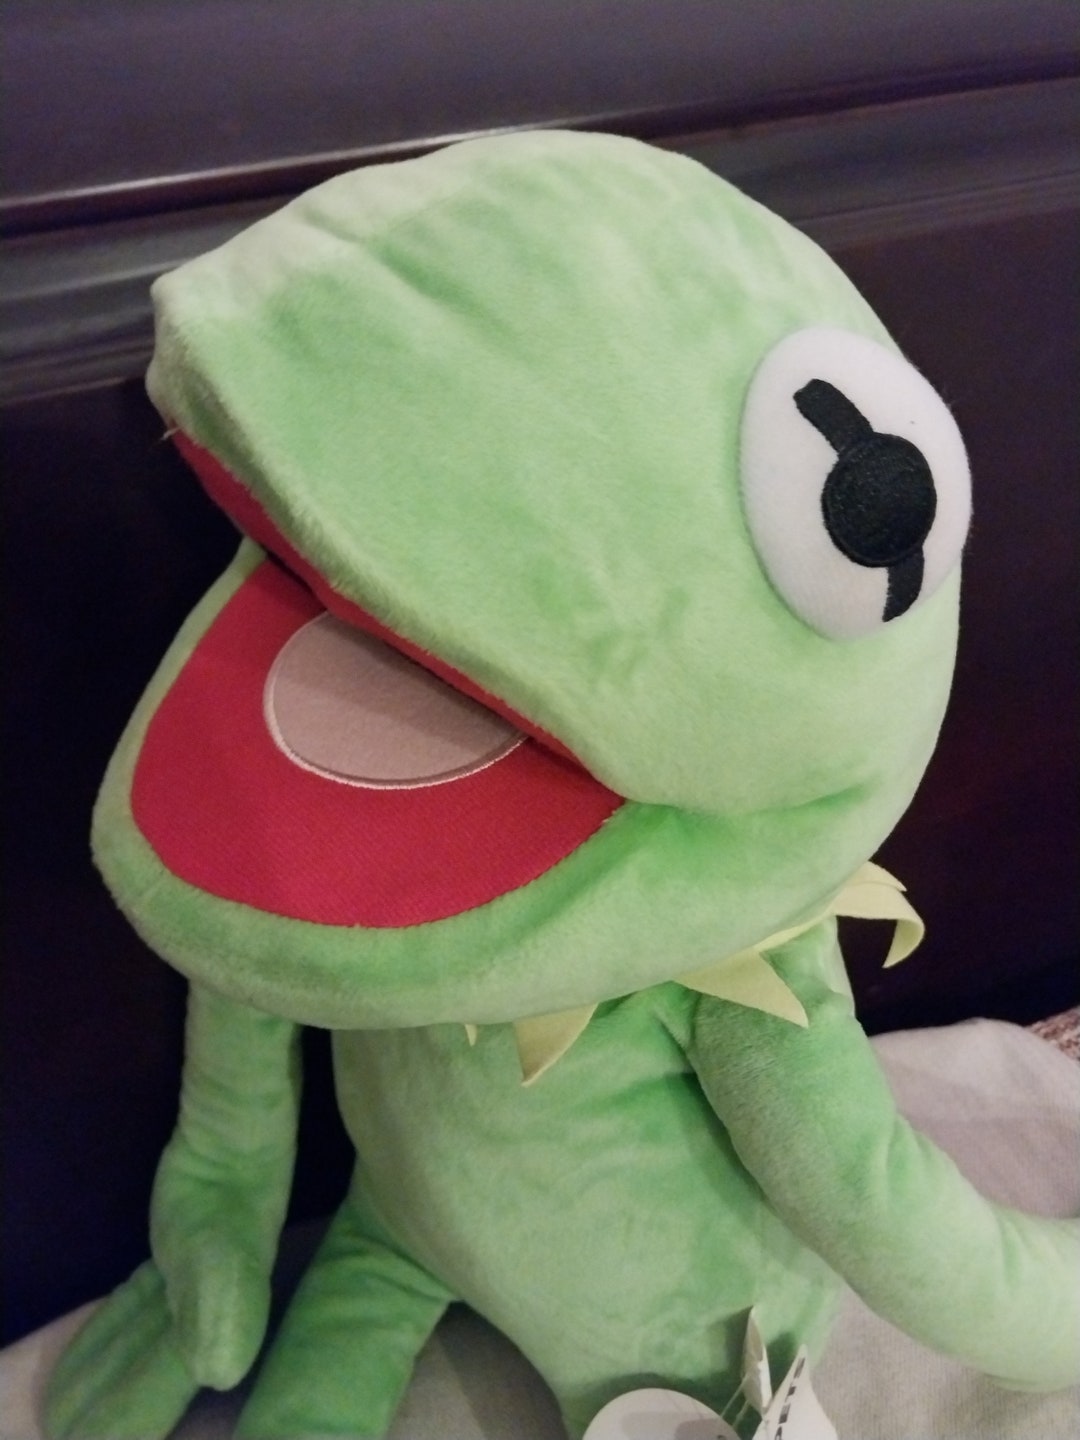 Muppets Kermit the Frog Plush Toy, 18, Best Made Toys